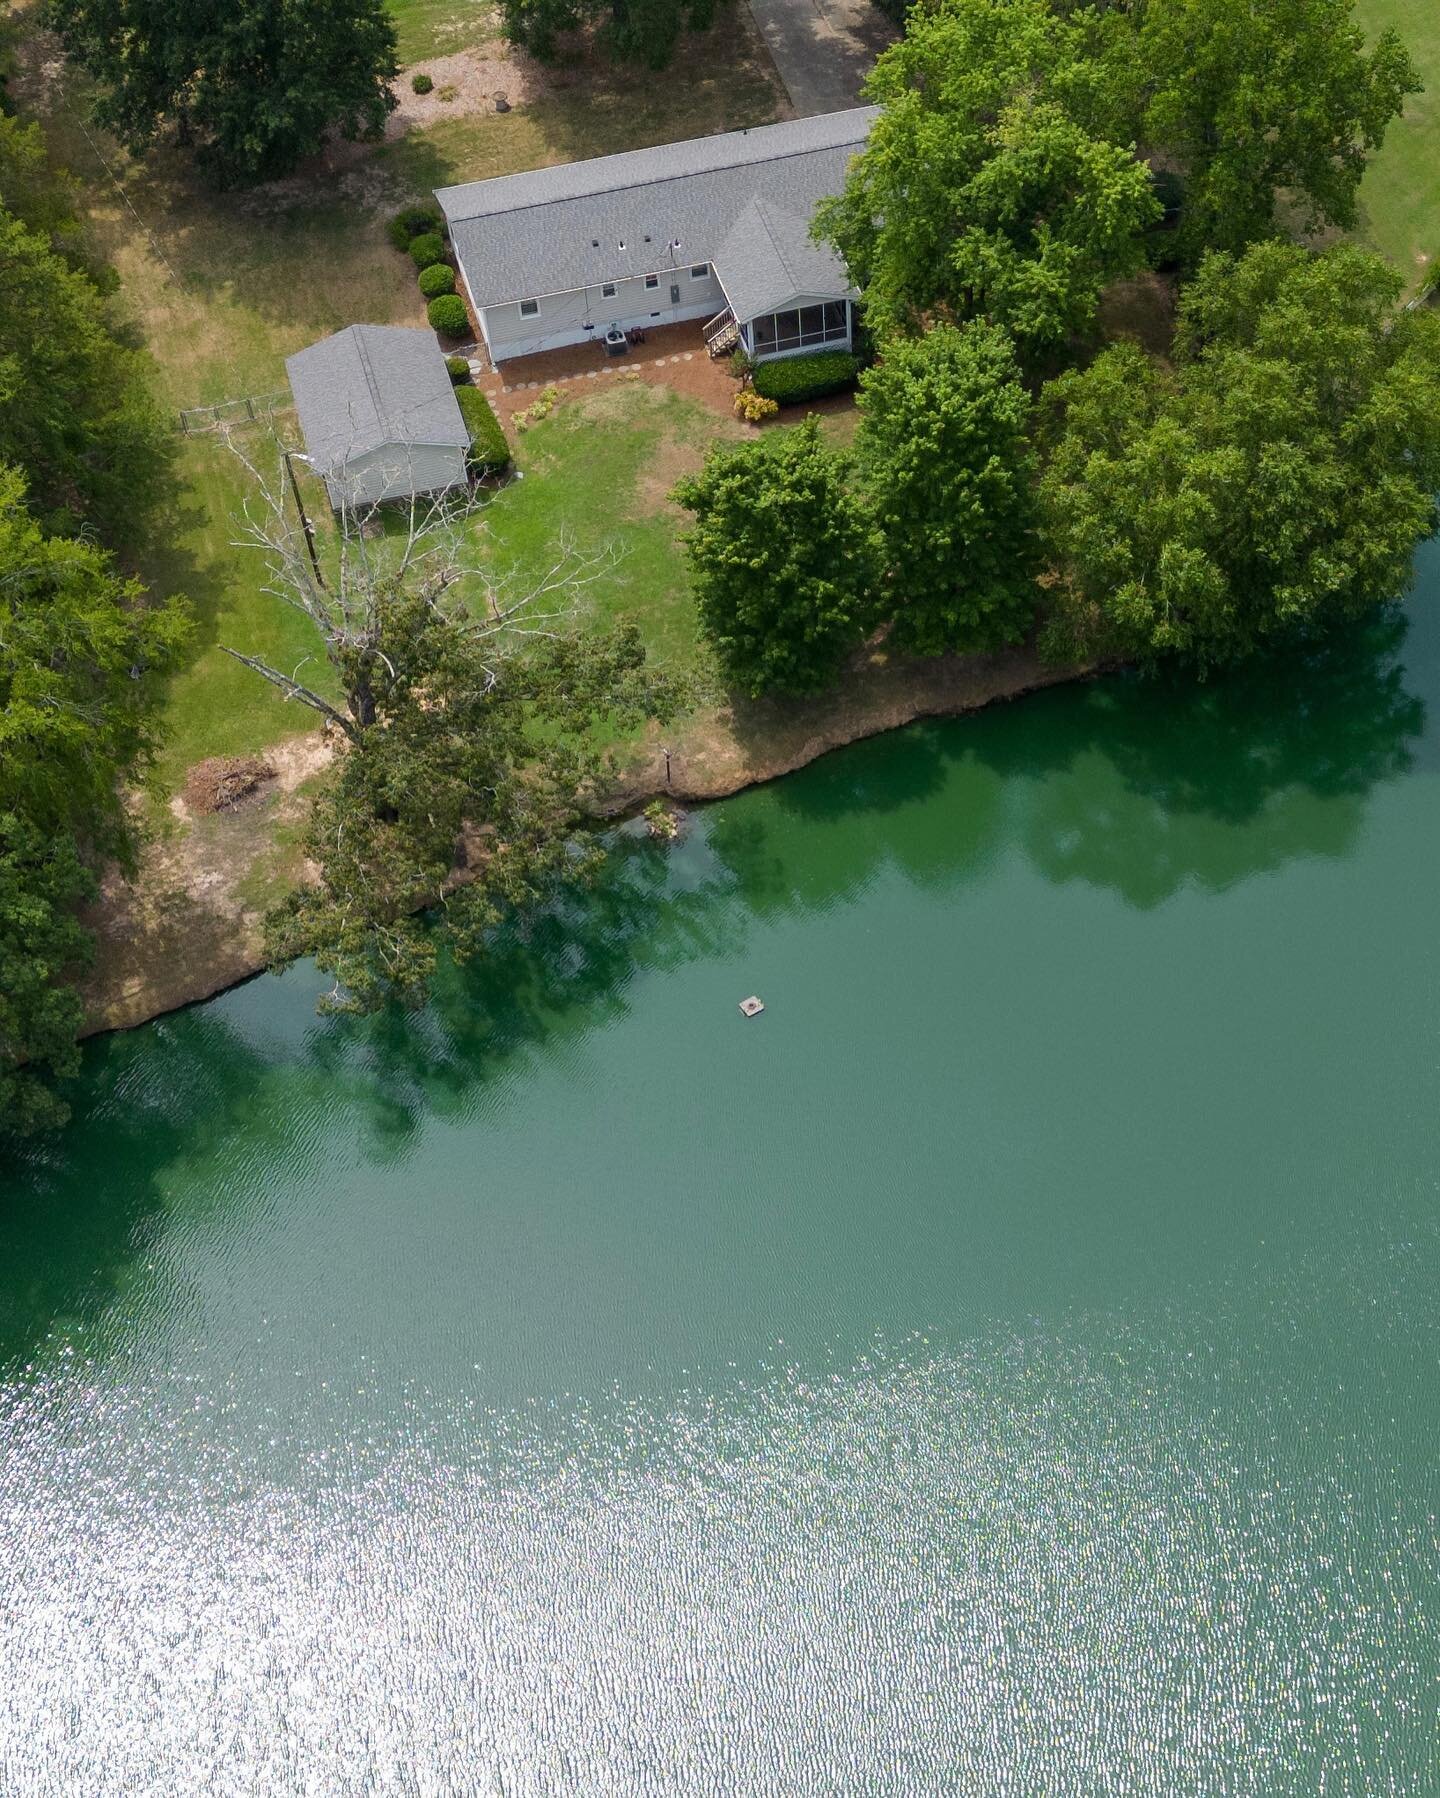 Seems like a great day to enjoy a cool breeze off your own pond in Durham NC! Check out this amazing listing by @bullcityagent @realestatebydesignnc 

#ncrealestate #durhamcountyrealestate #durhamncrealestate #bullcityrealestate #trianglencrealestate